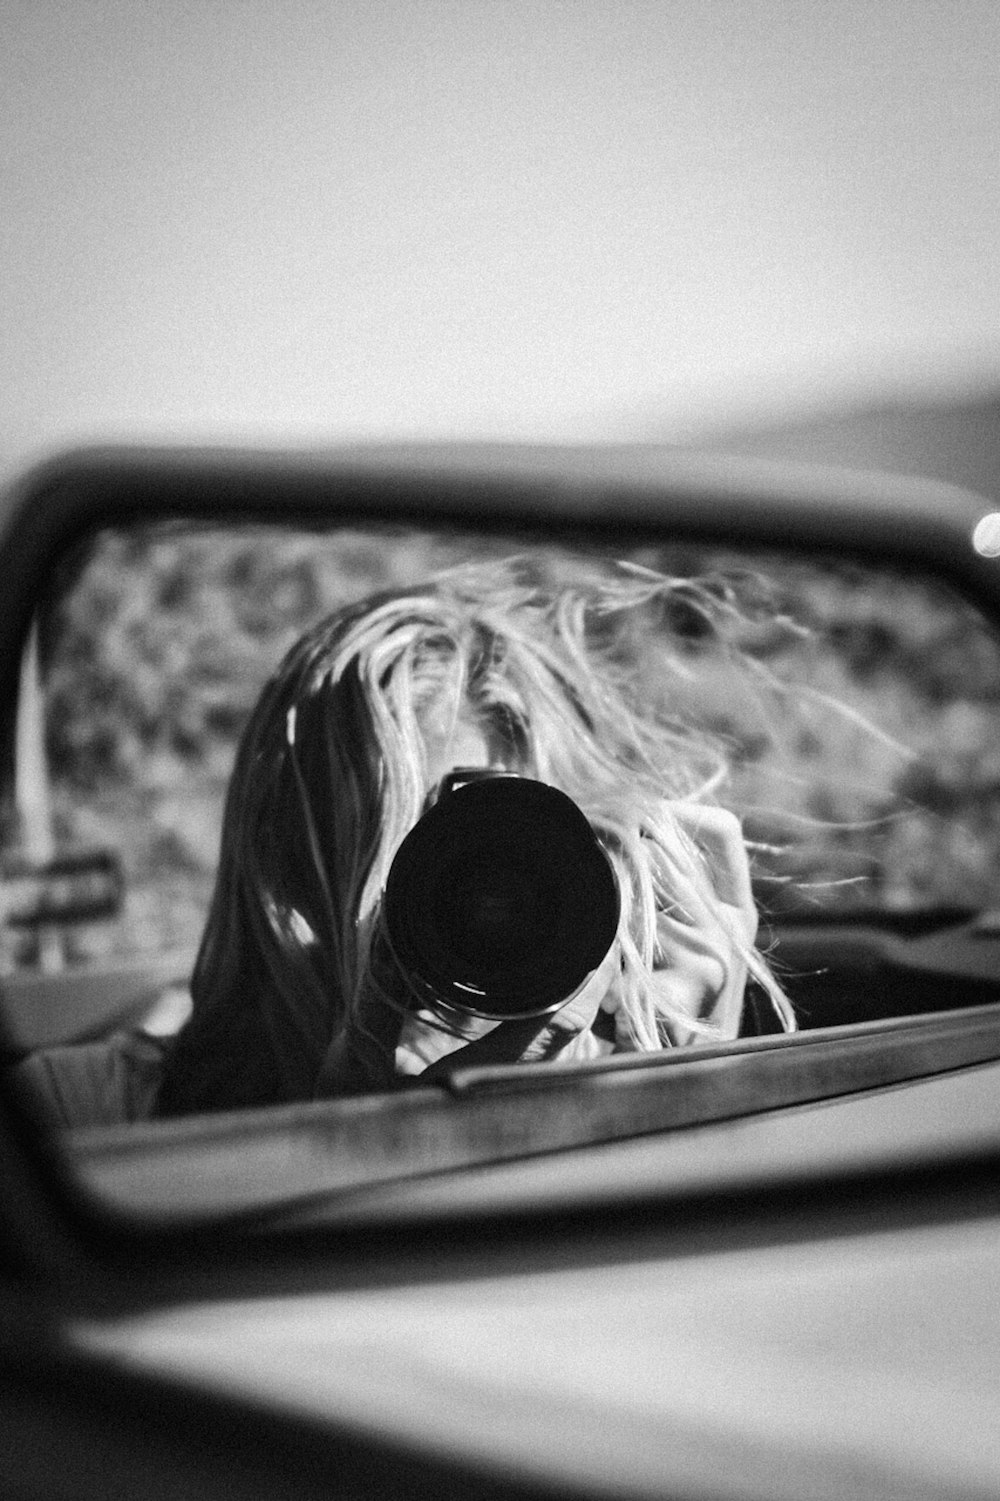 woman taking photo of car side mirror